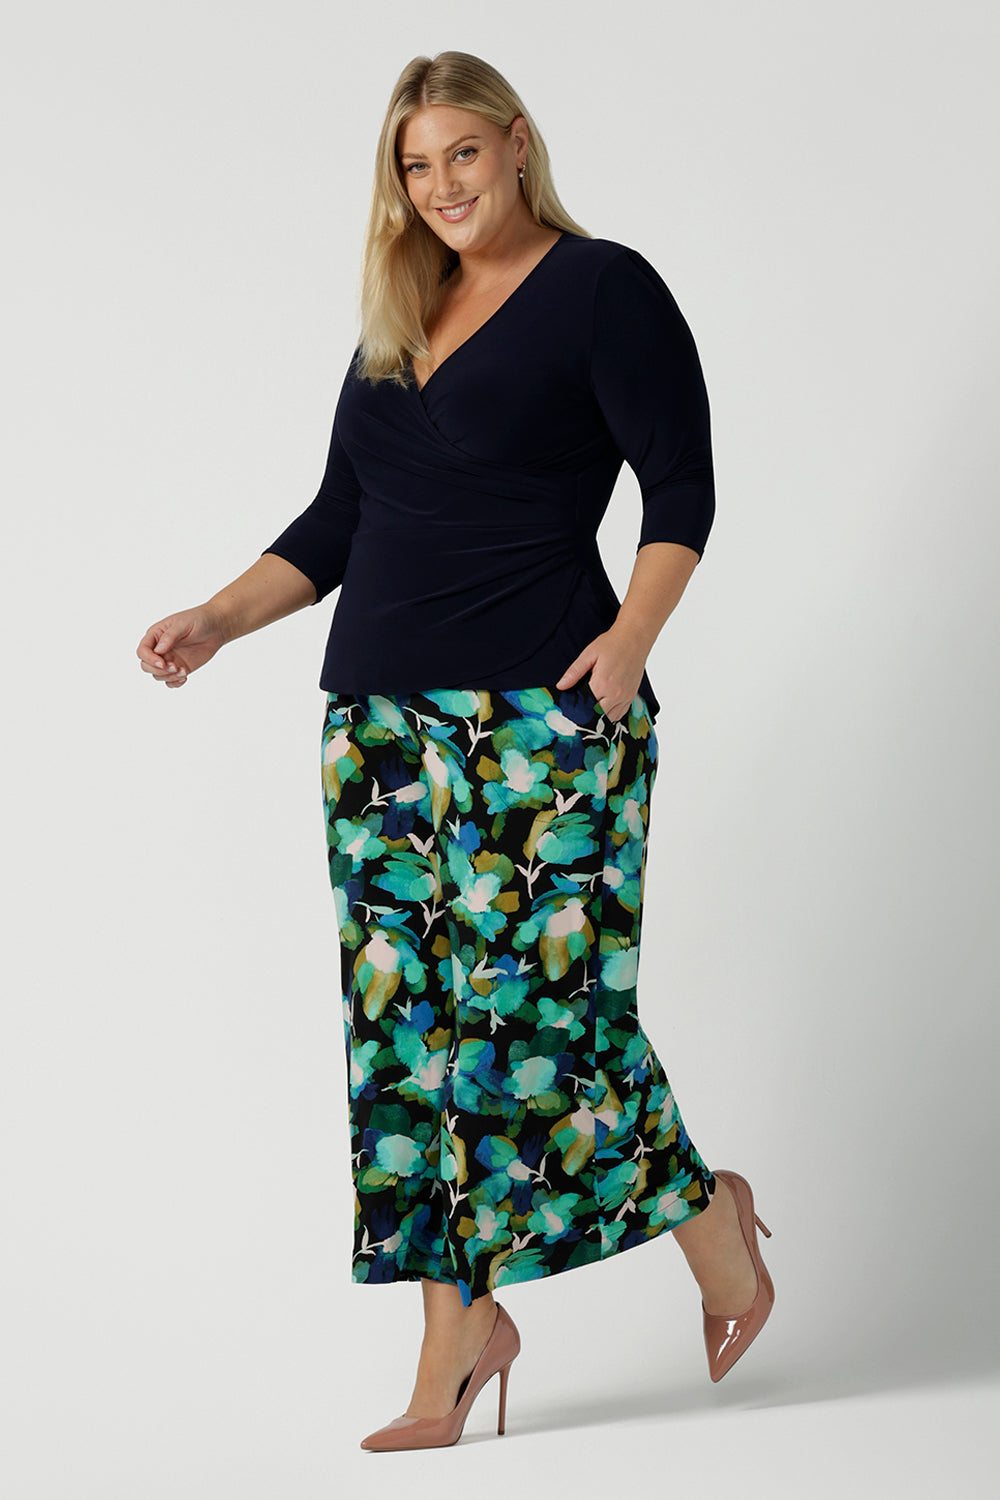 Size 18 woman wears the Dany culotte in Canopy, a full leg culotte with a canopy print. A bold green colour splatter print. Styled back with pink heels and a navy wrap top. Made in Australia for women size 8 - 24.